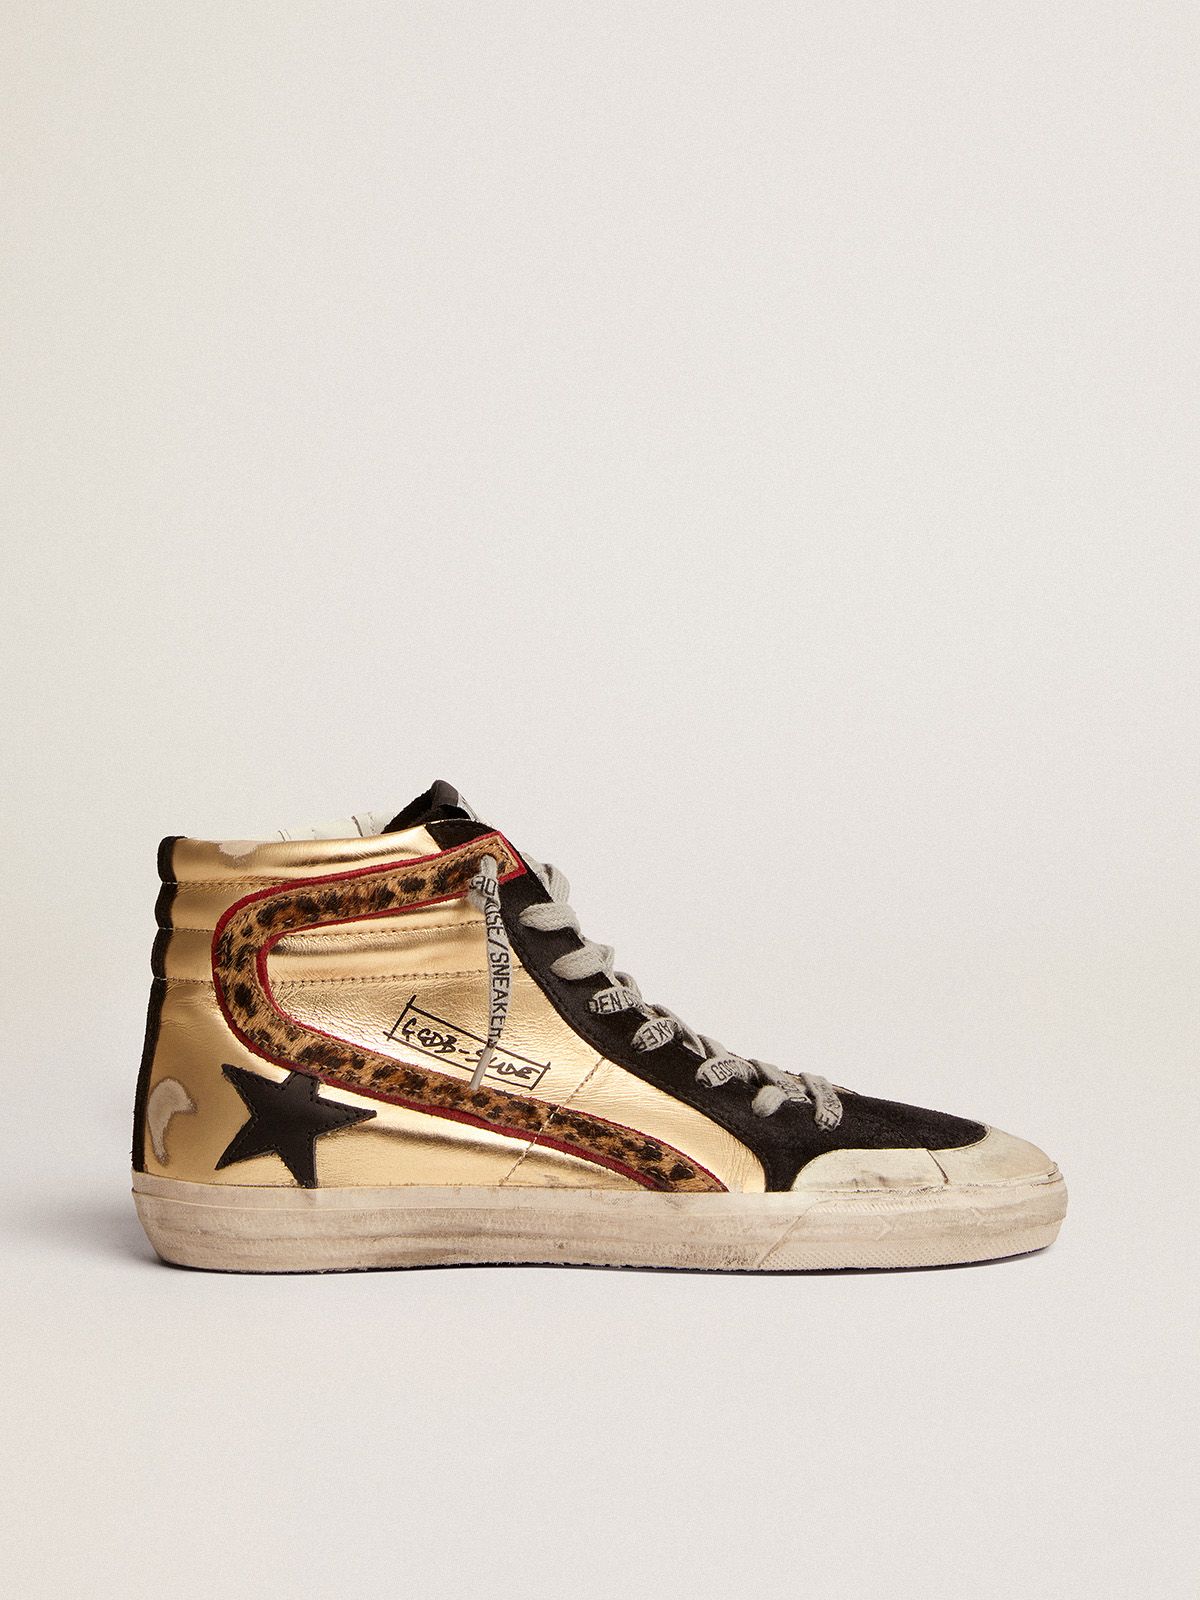 golden goose leather in star pony insert leopard-print Penstar skin black gold with Slide and sneakers